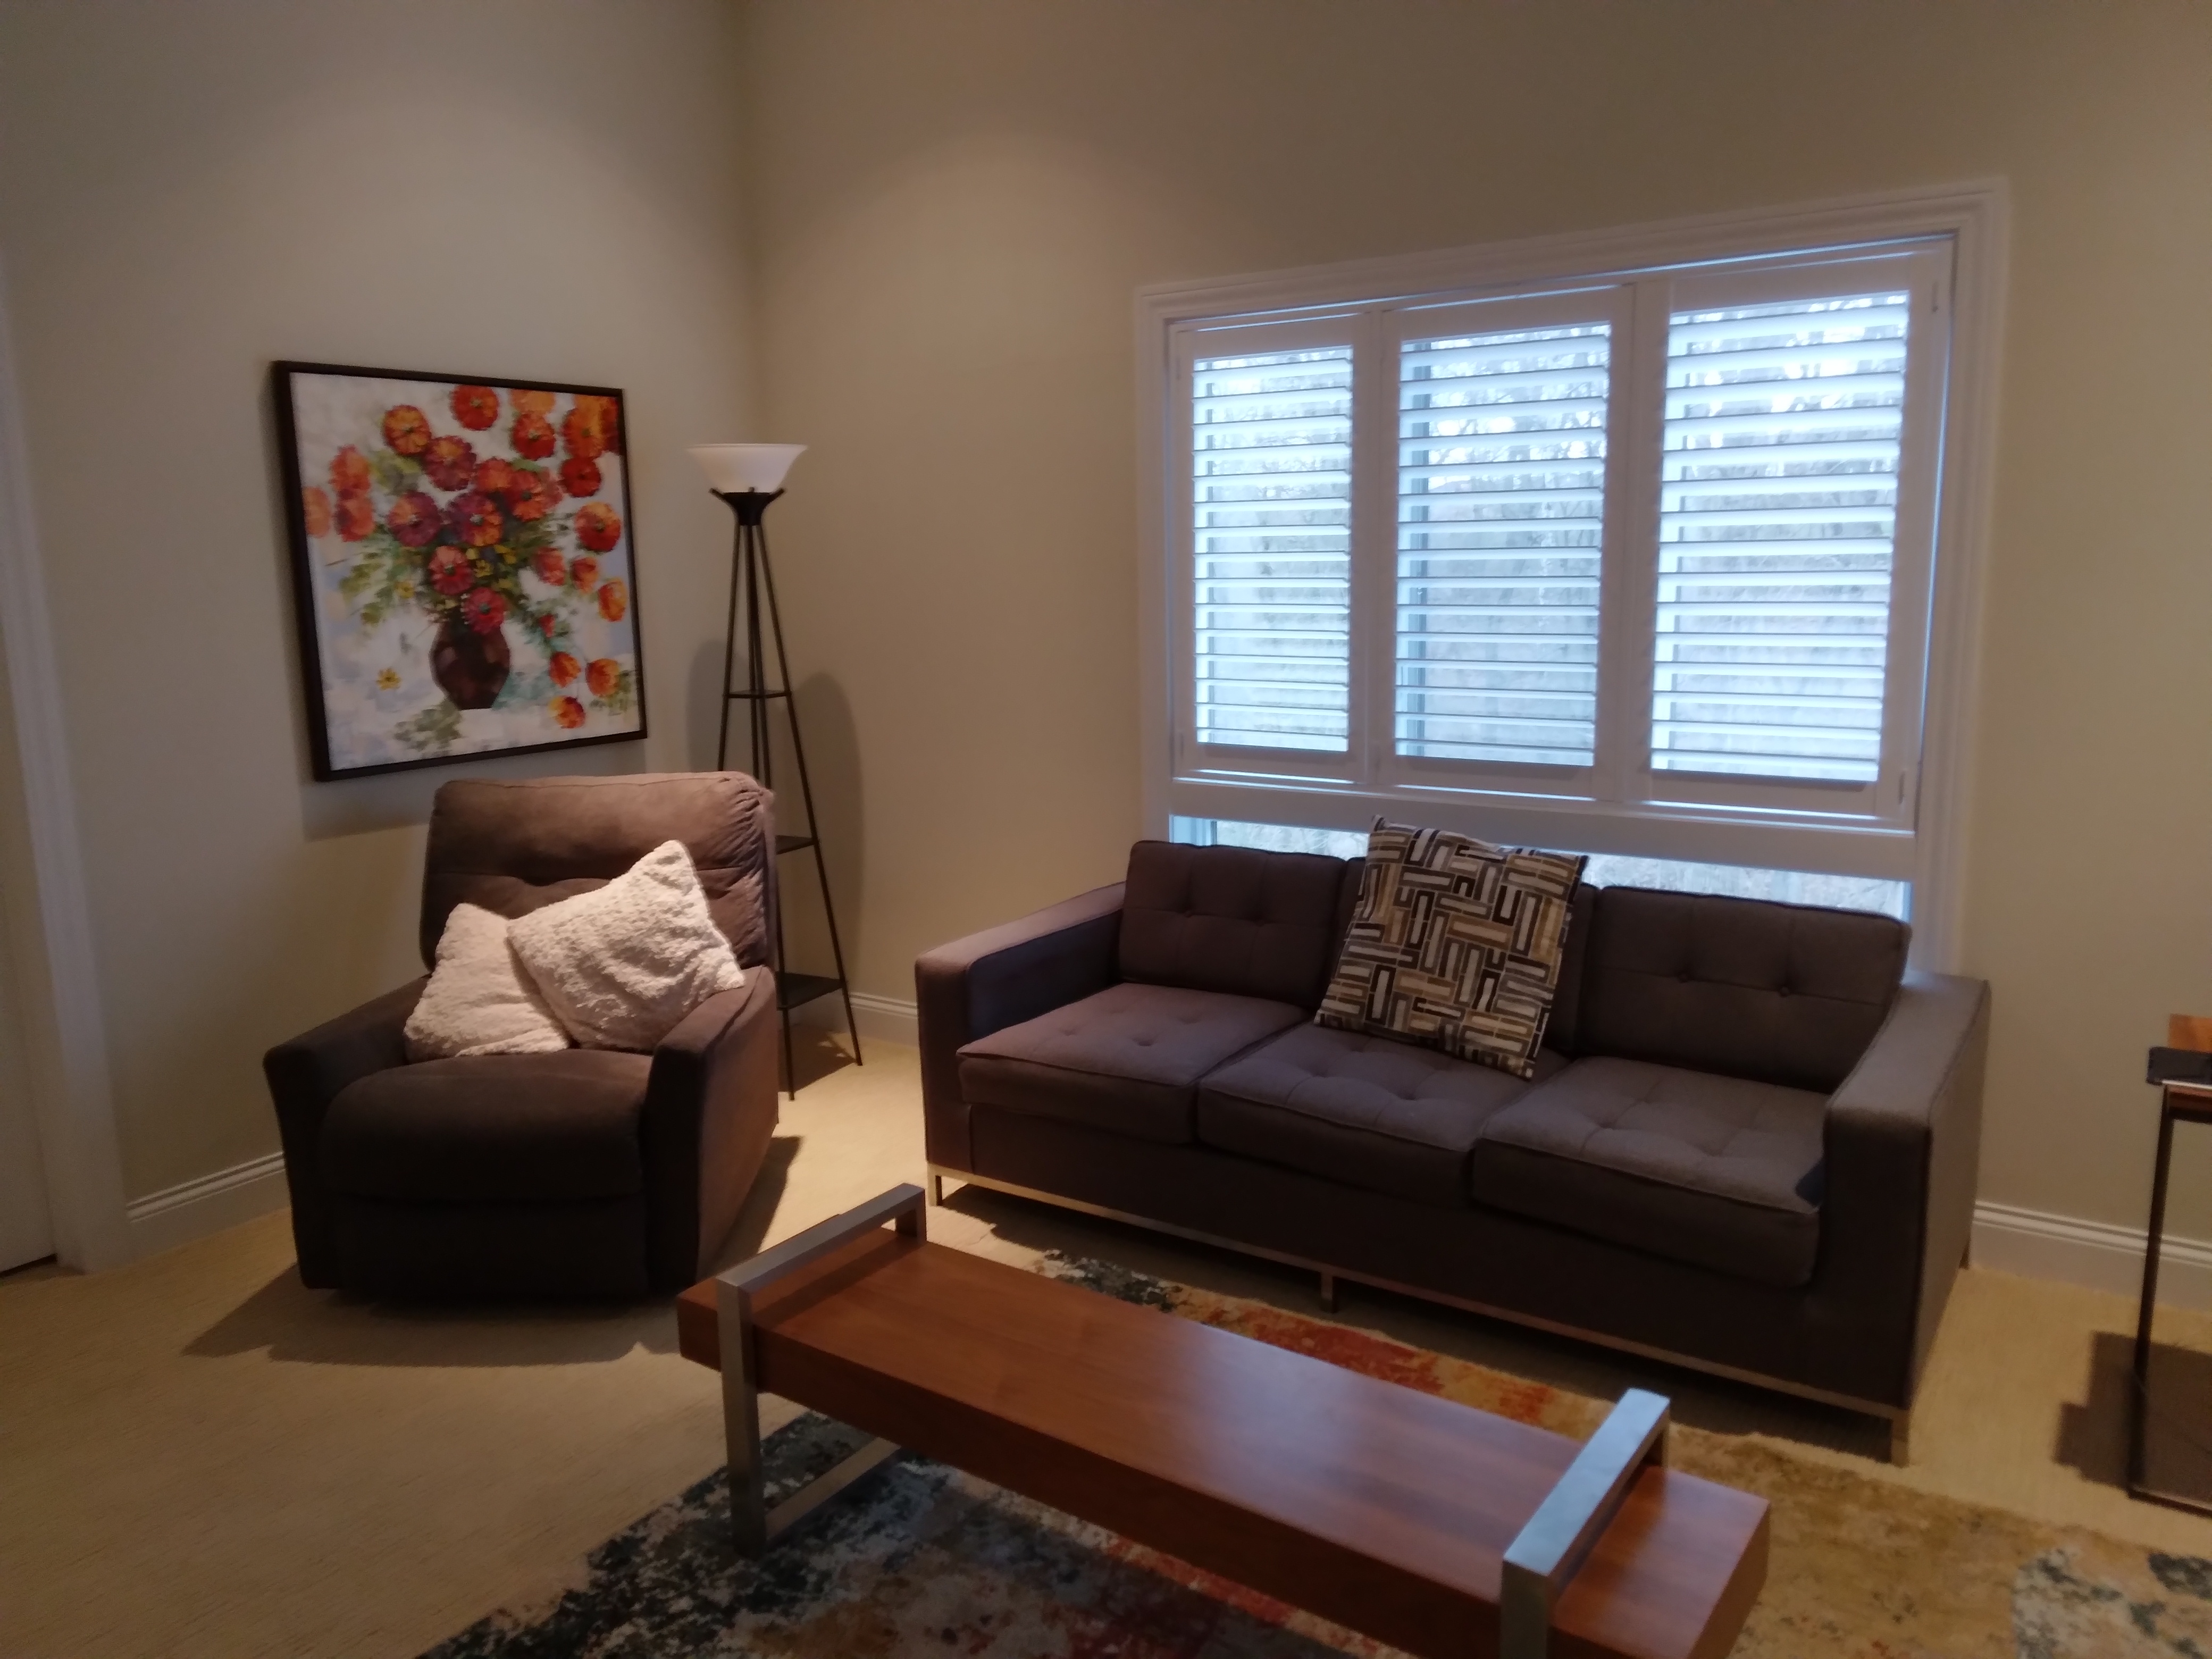 These white shutters are the perfect window covering solution for these windows in a local Springfield Illinois home. They add an elegant touch and are very practical.  BudgetBlinds  WindowCoverings  Shades  Blinds  PlantationShutters  Shutters  SpringfieldIllinois